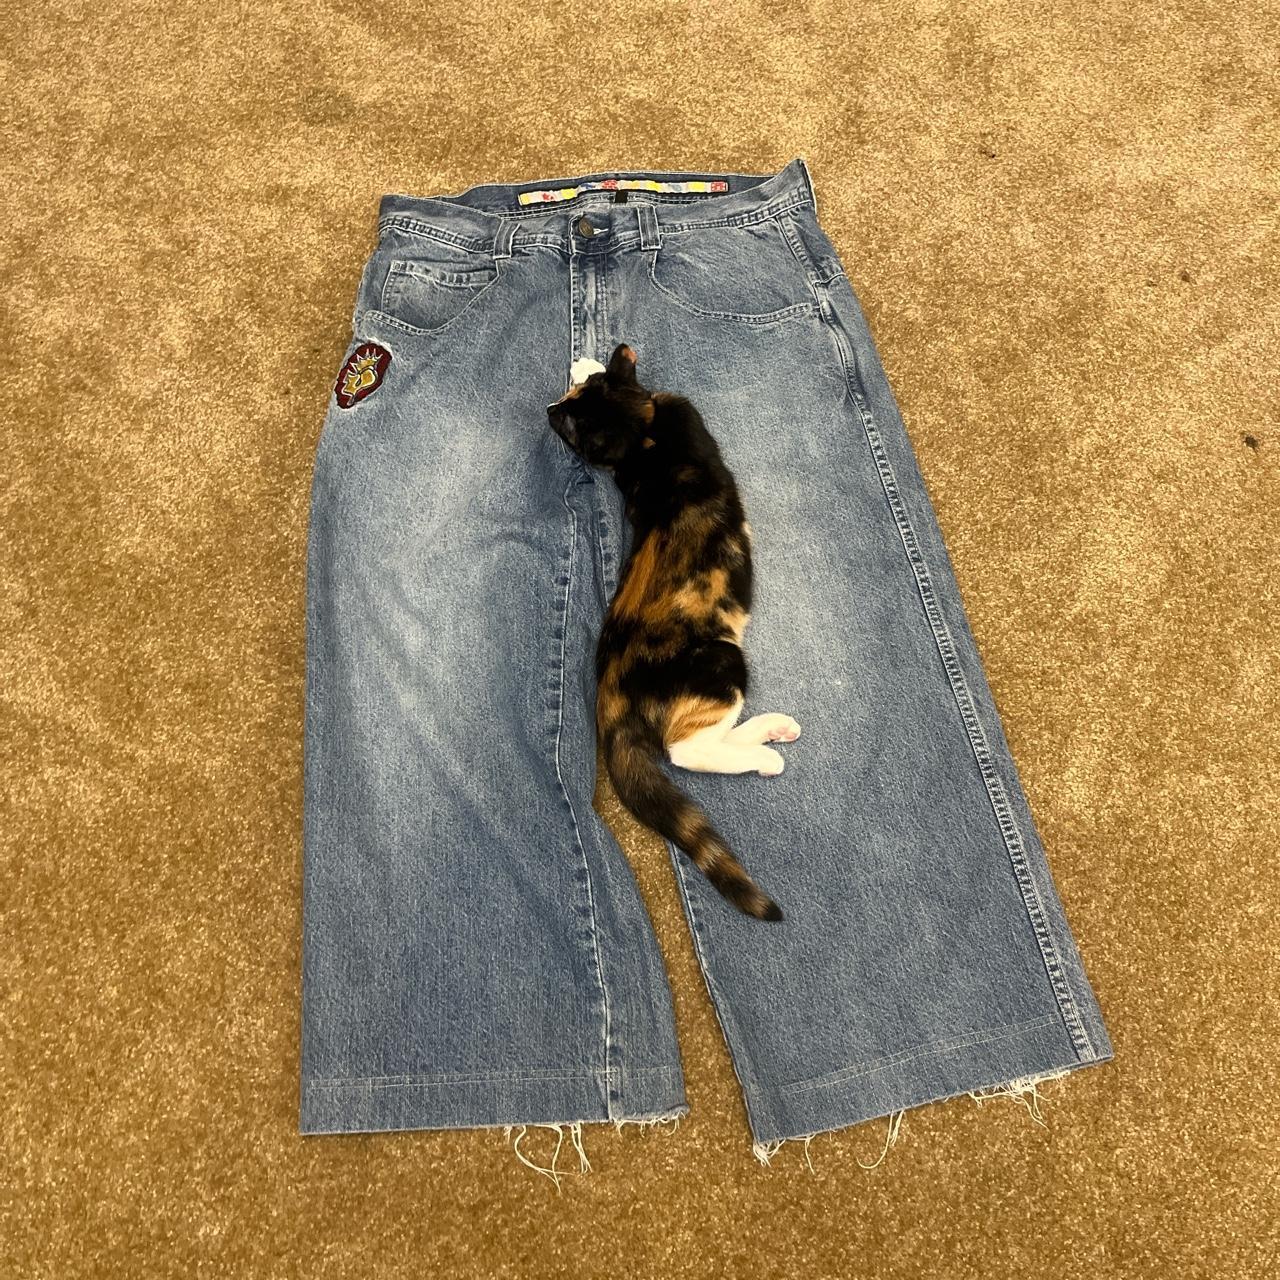 JESTER JNCO JEANS these arent on the jnco website... - Depop